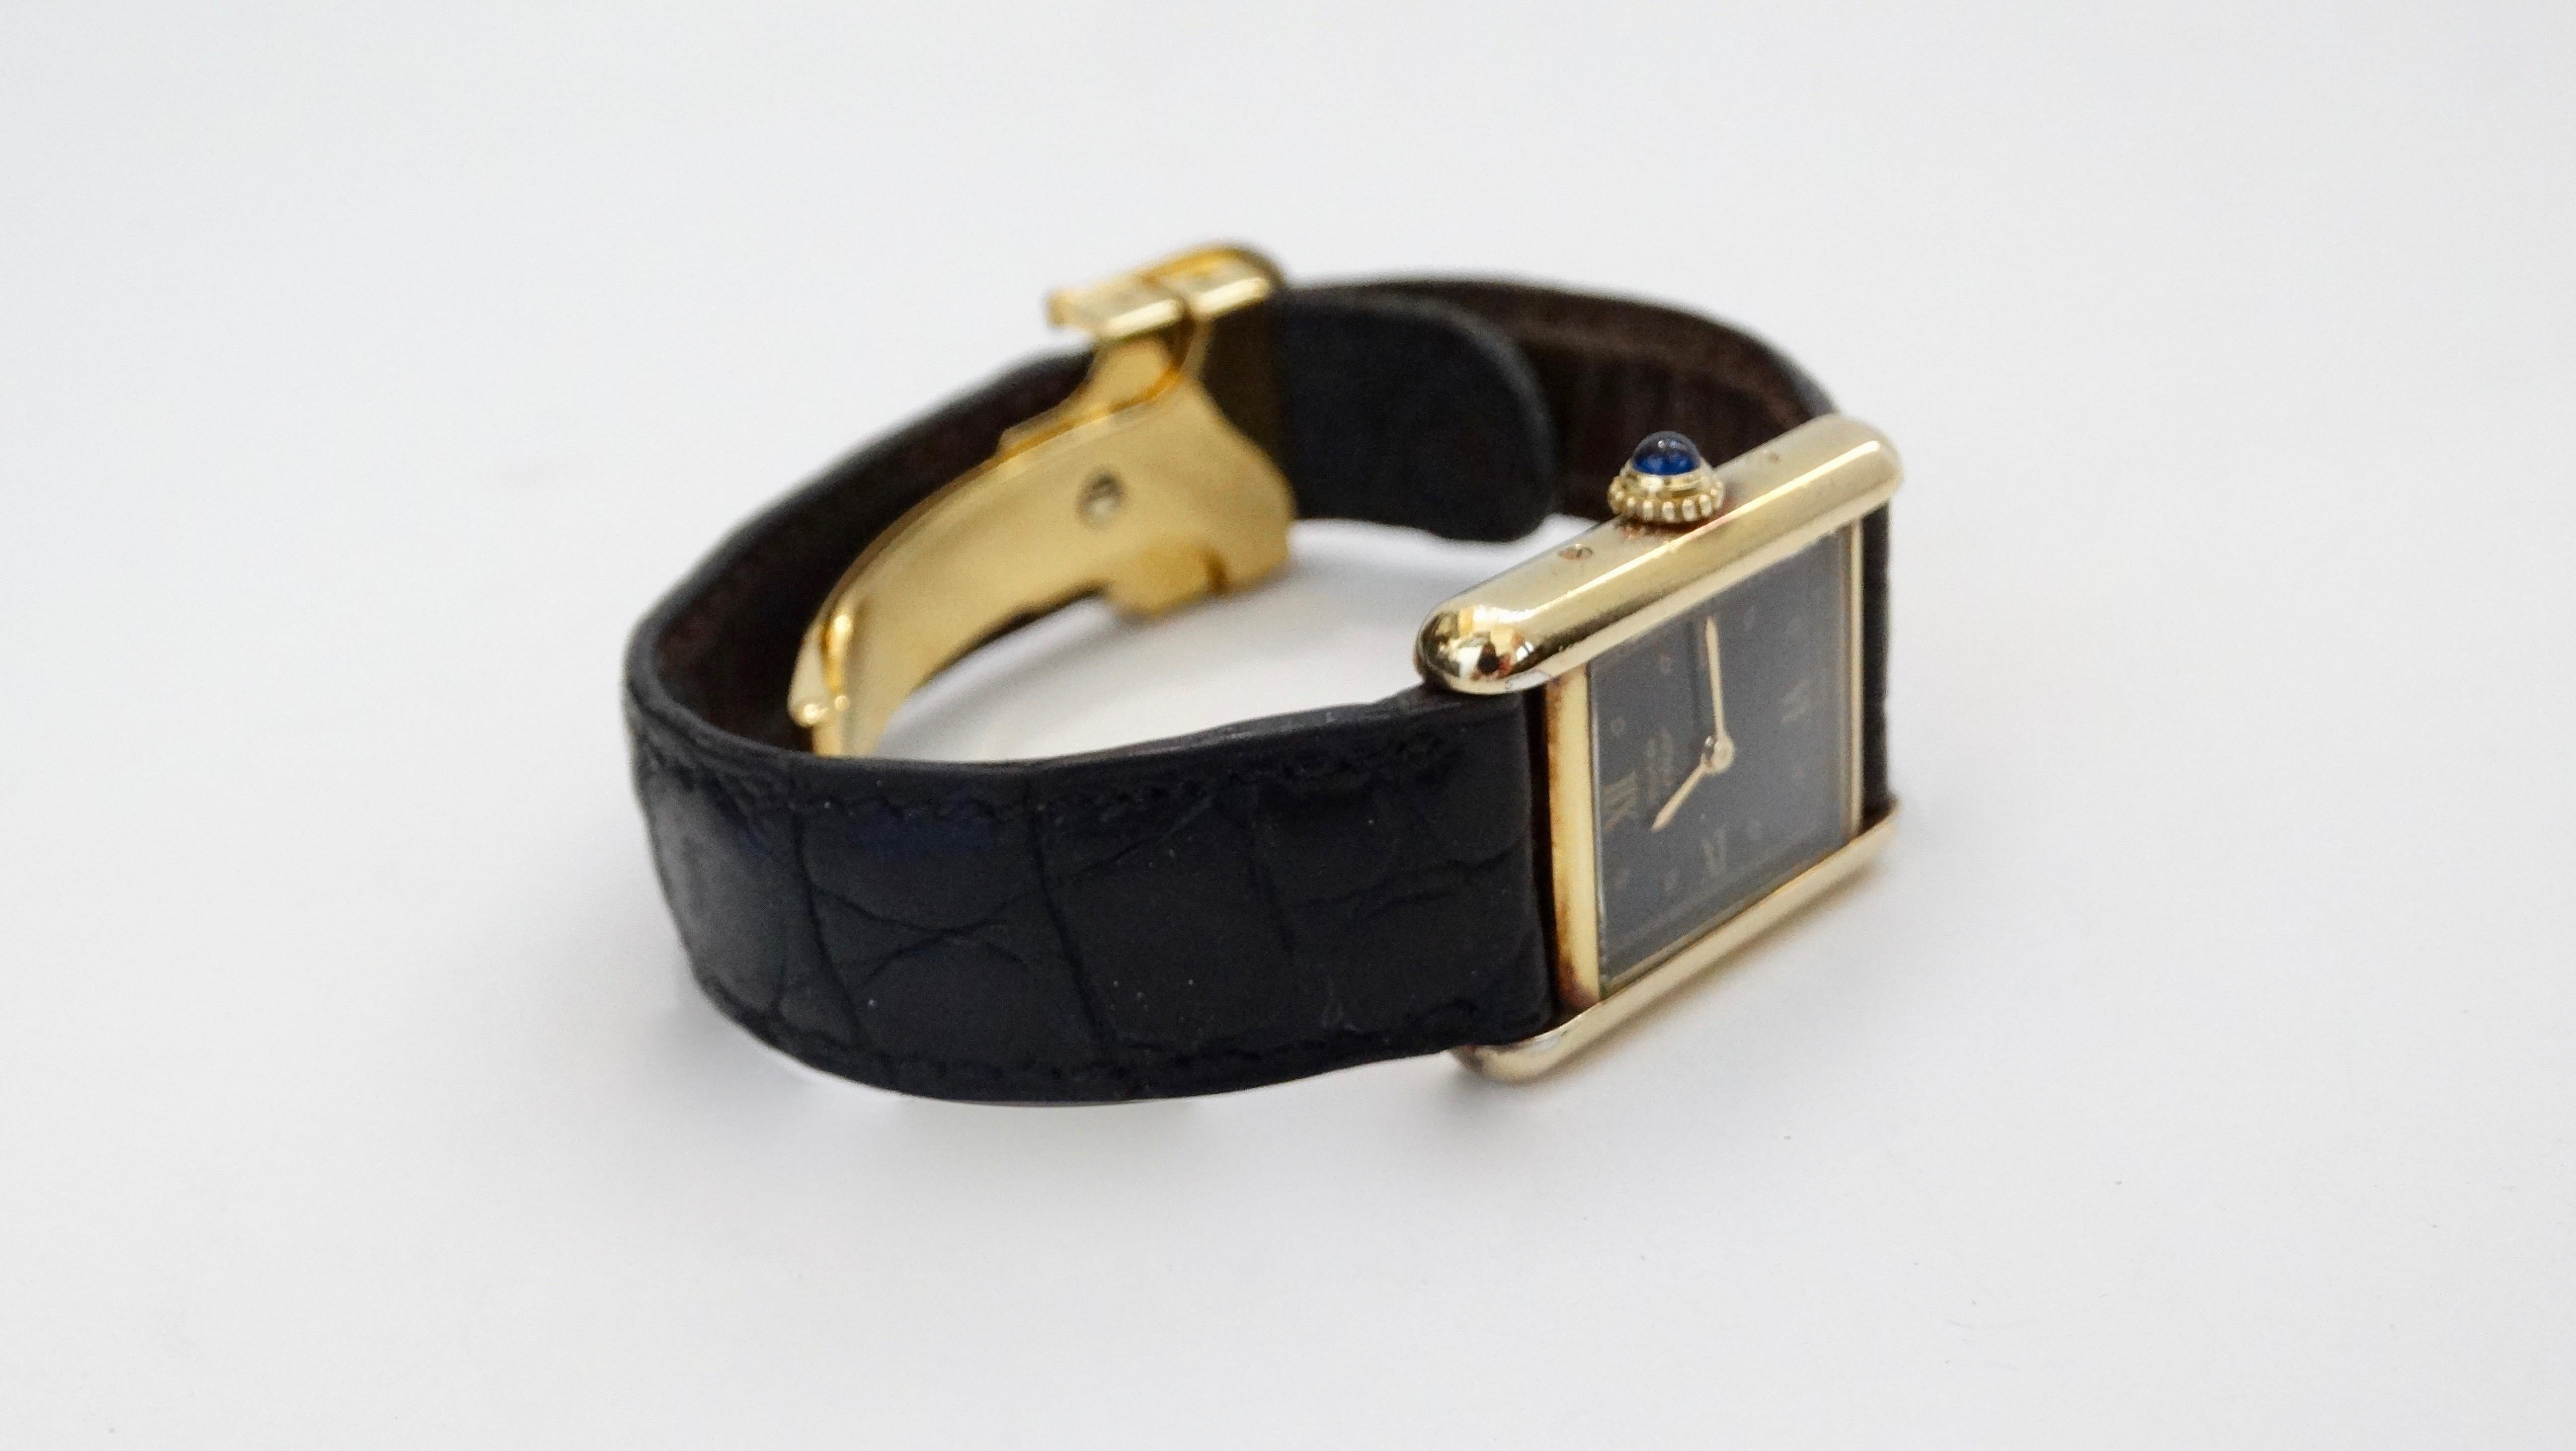 Gorgeous Cartier Vermeil Alligator 20mm Must de Cartier Tank watch. A classic Swiss made timepiece with a black alligator leather strap and a sterling silver 18k yellow gold plated vermeil bezel and buckle. Features Quartz movement and a synthetic